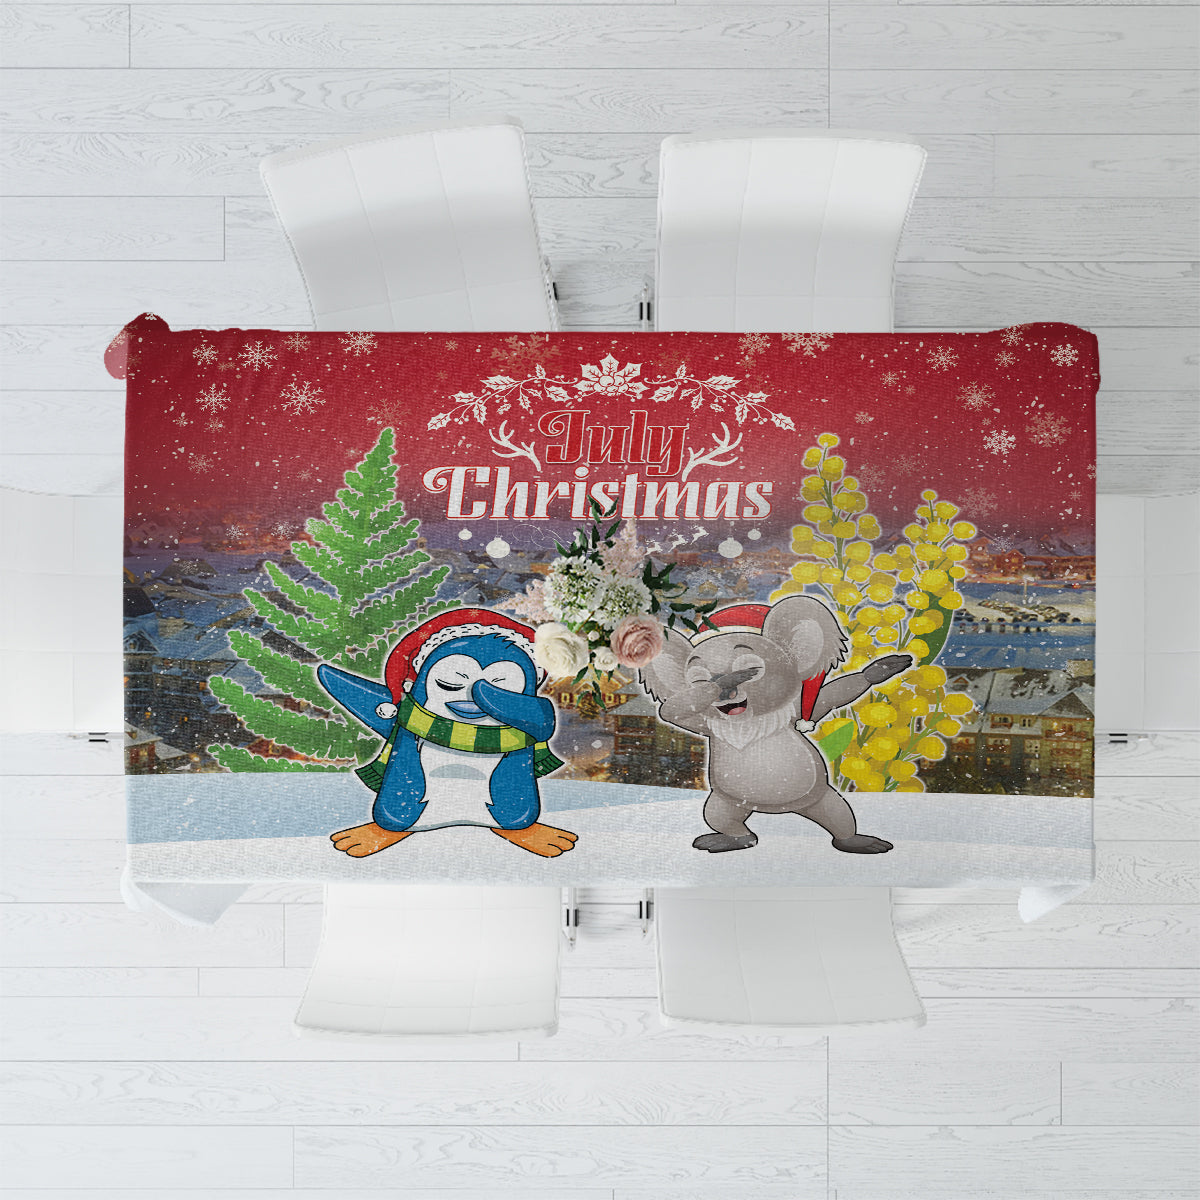 Christmas In July Tablecloth Funny Dabbing Dance Koala And Blue Penguins